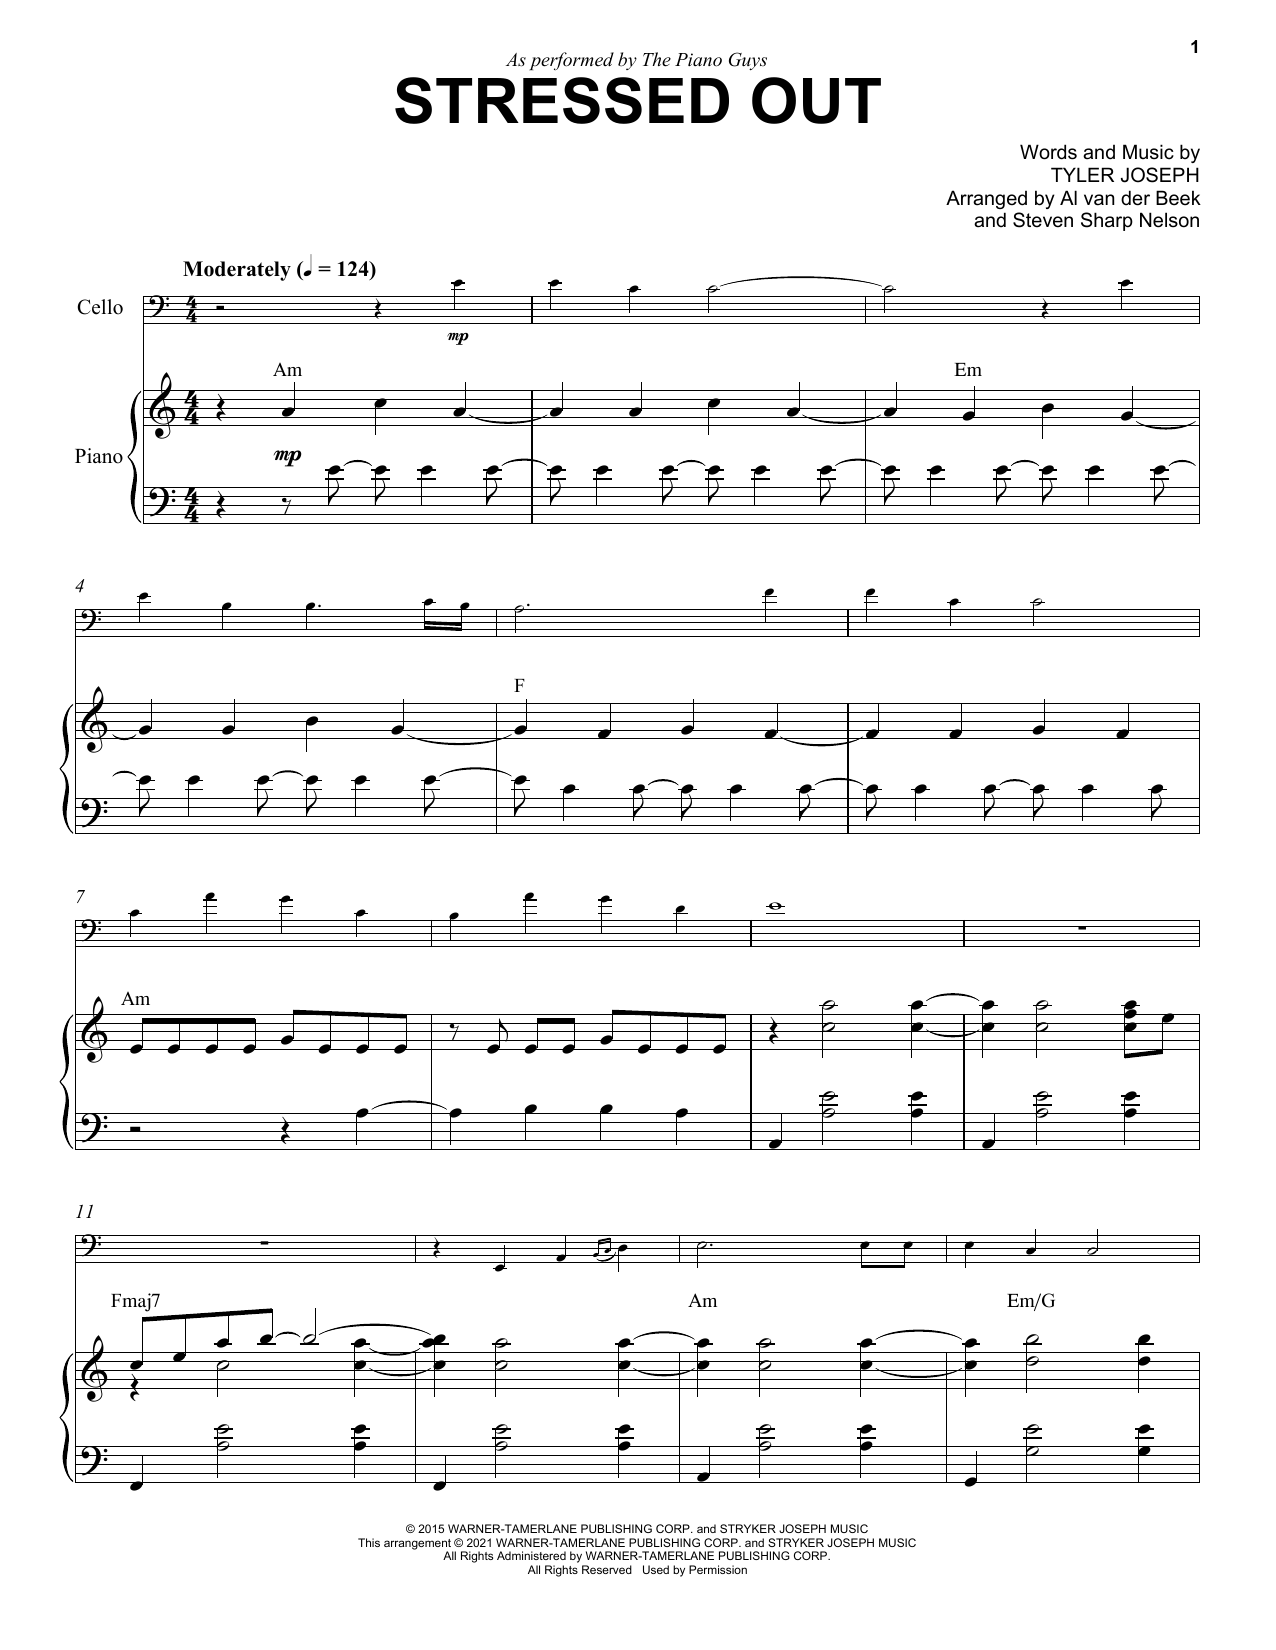 Download The Piano Guys (De)Stressed Out Sheet Music